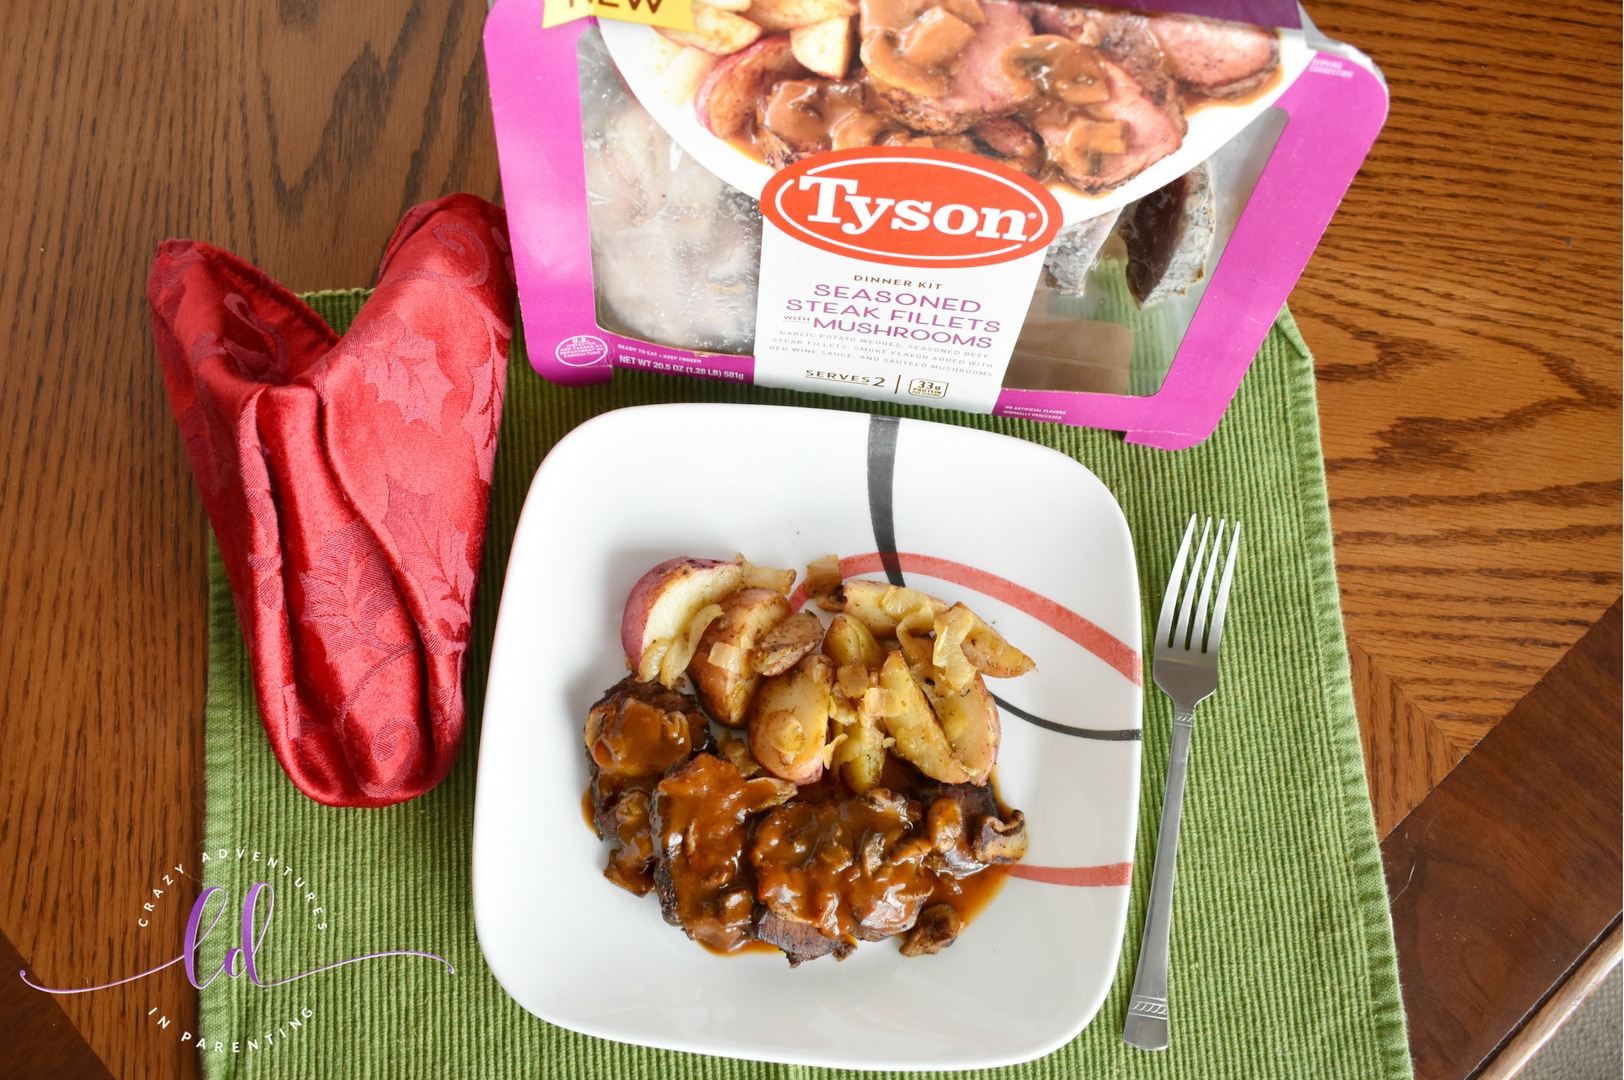 Tyson Fully Cooked Dinner and Entrée Kit - Seasoned Steak Fillet & Mushrooms ready to eat